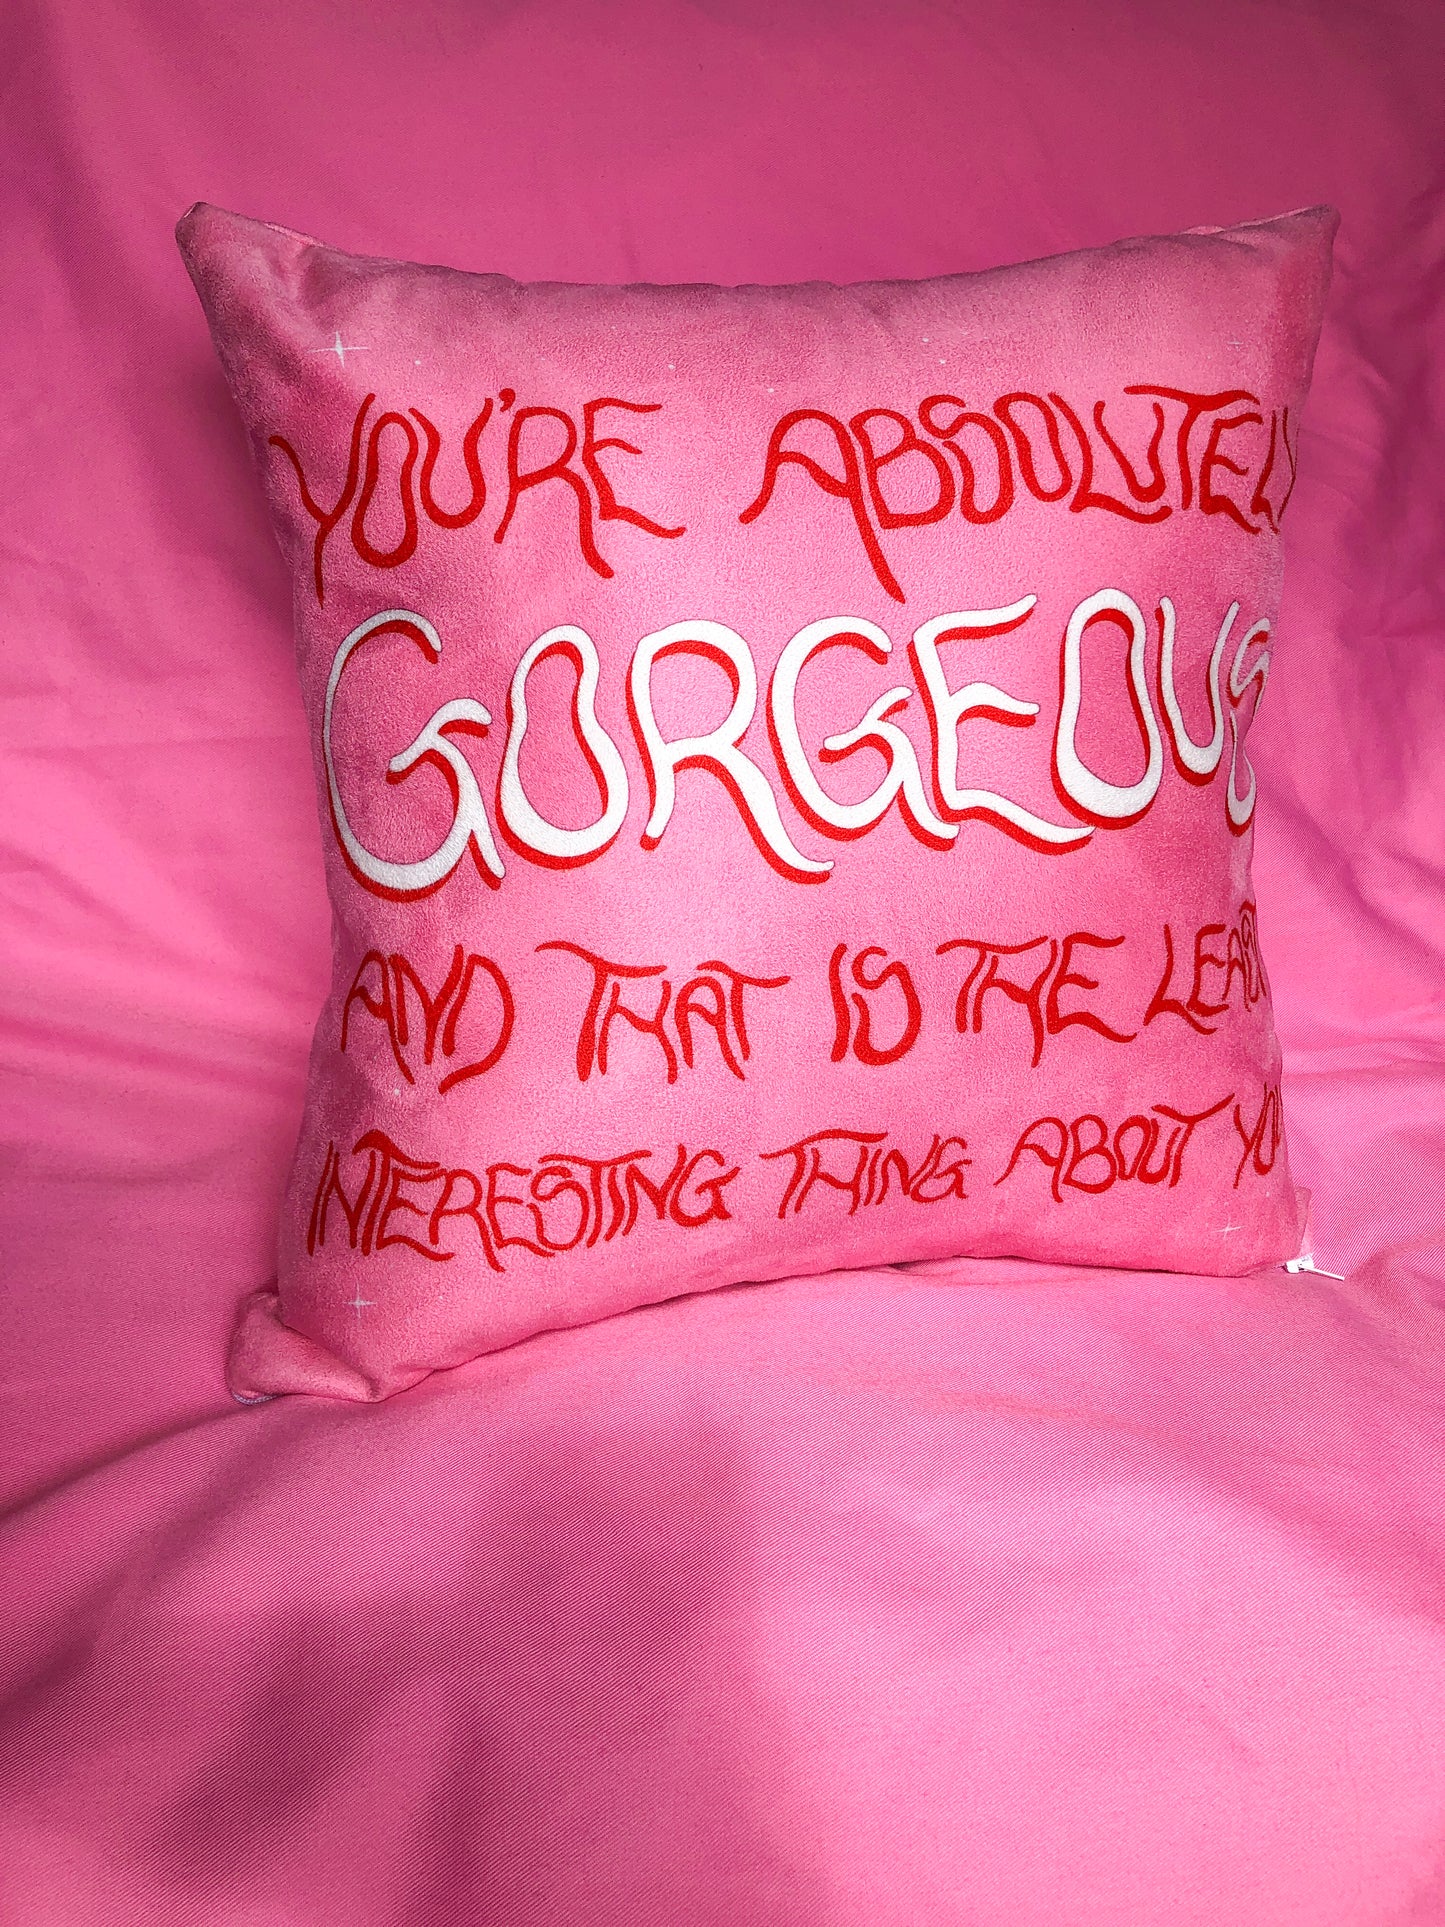 You're absolutely gorgeous cushion